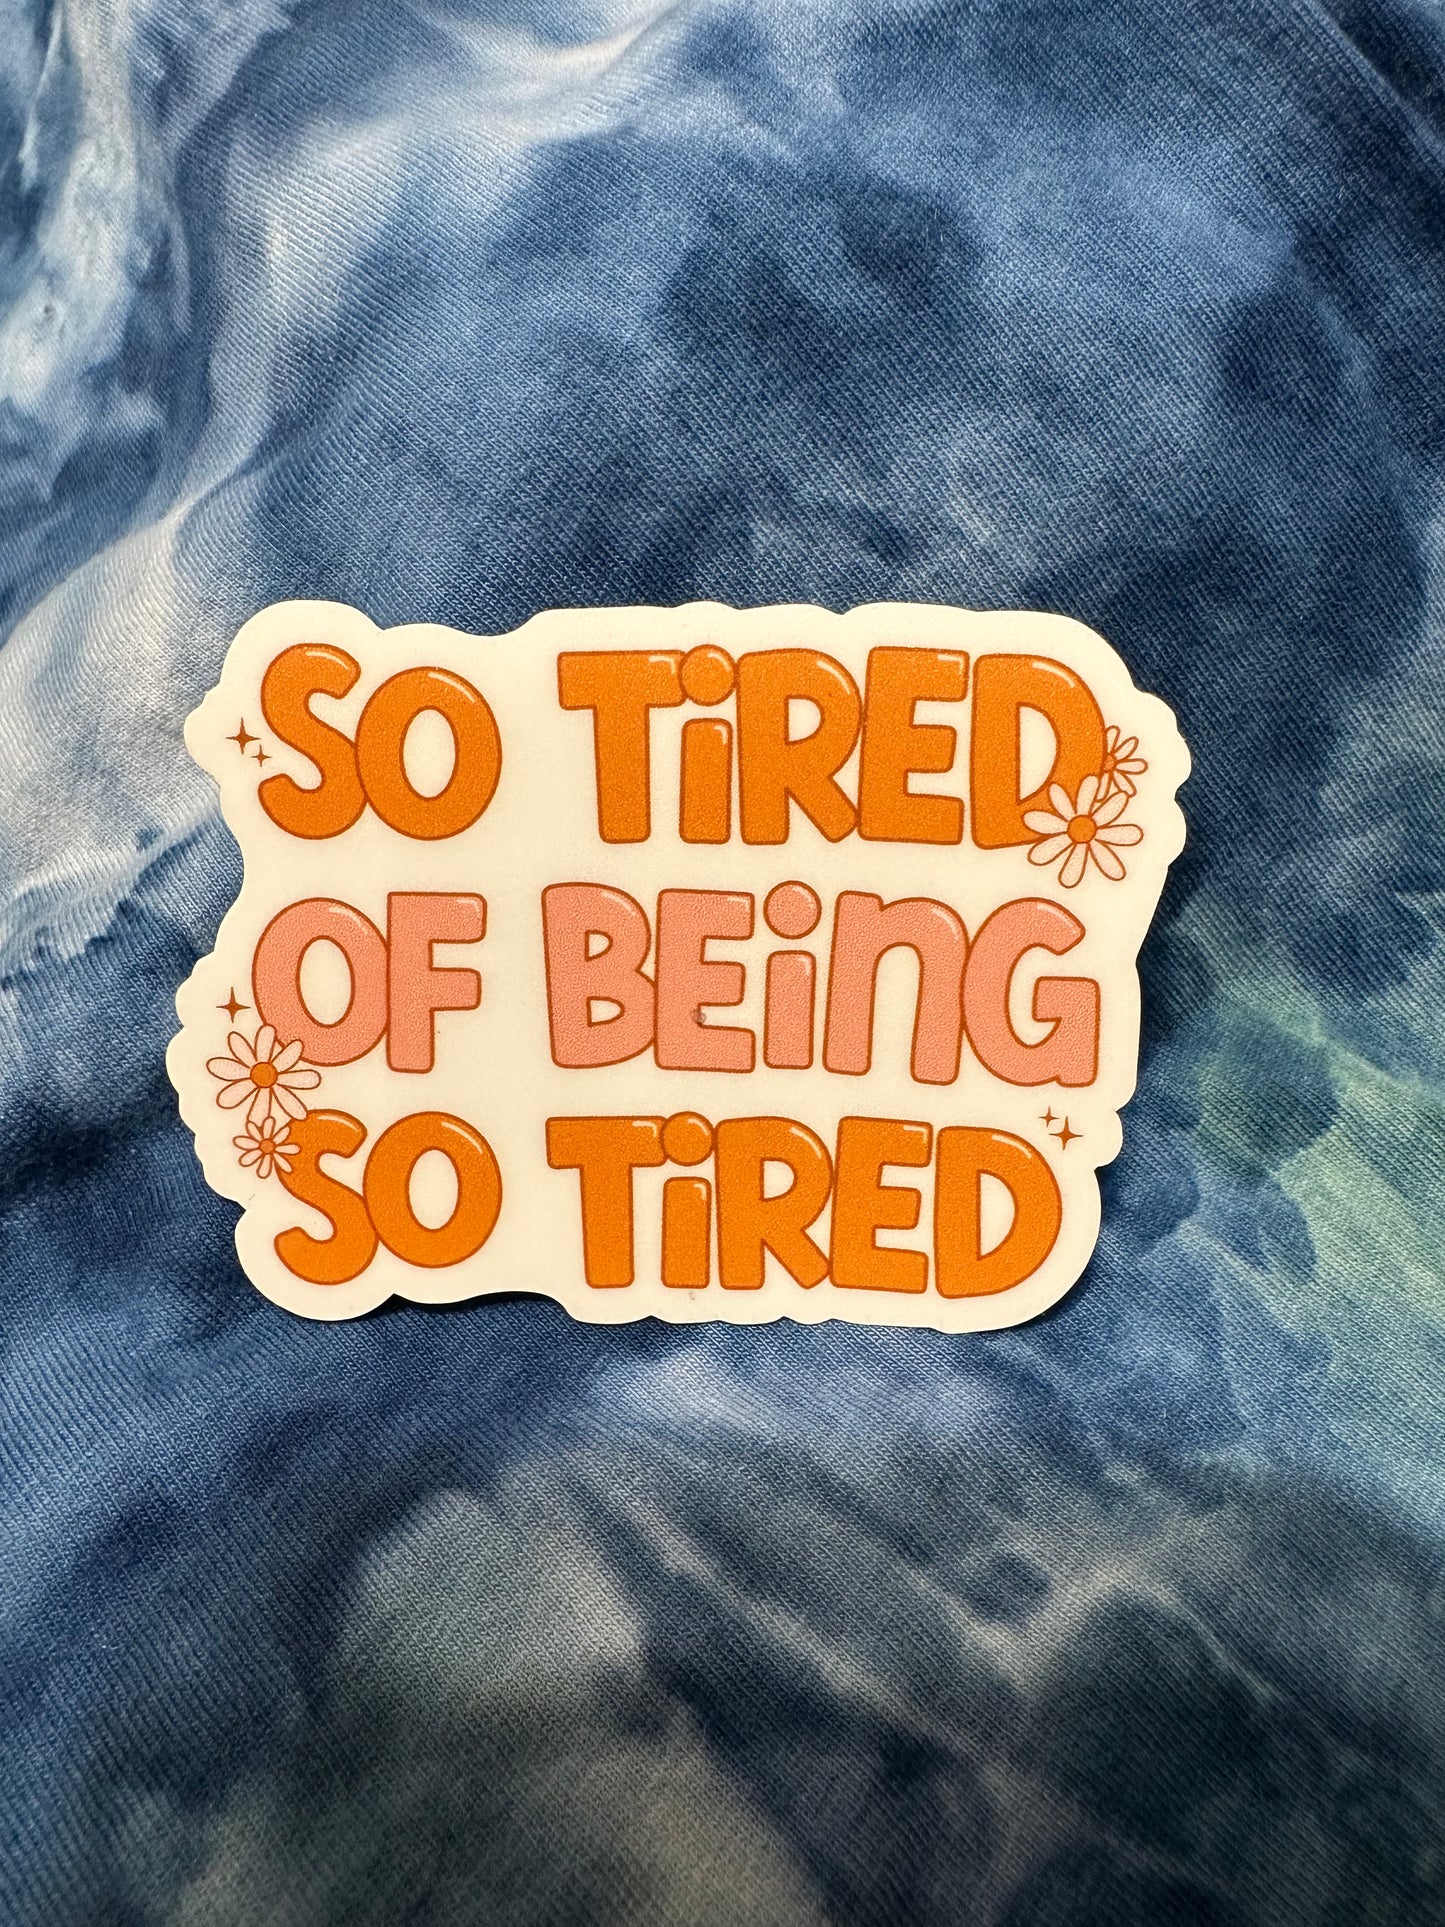 So tired